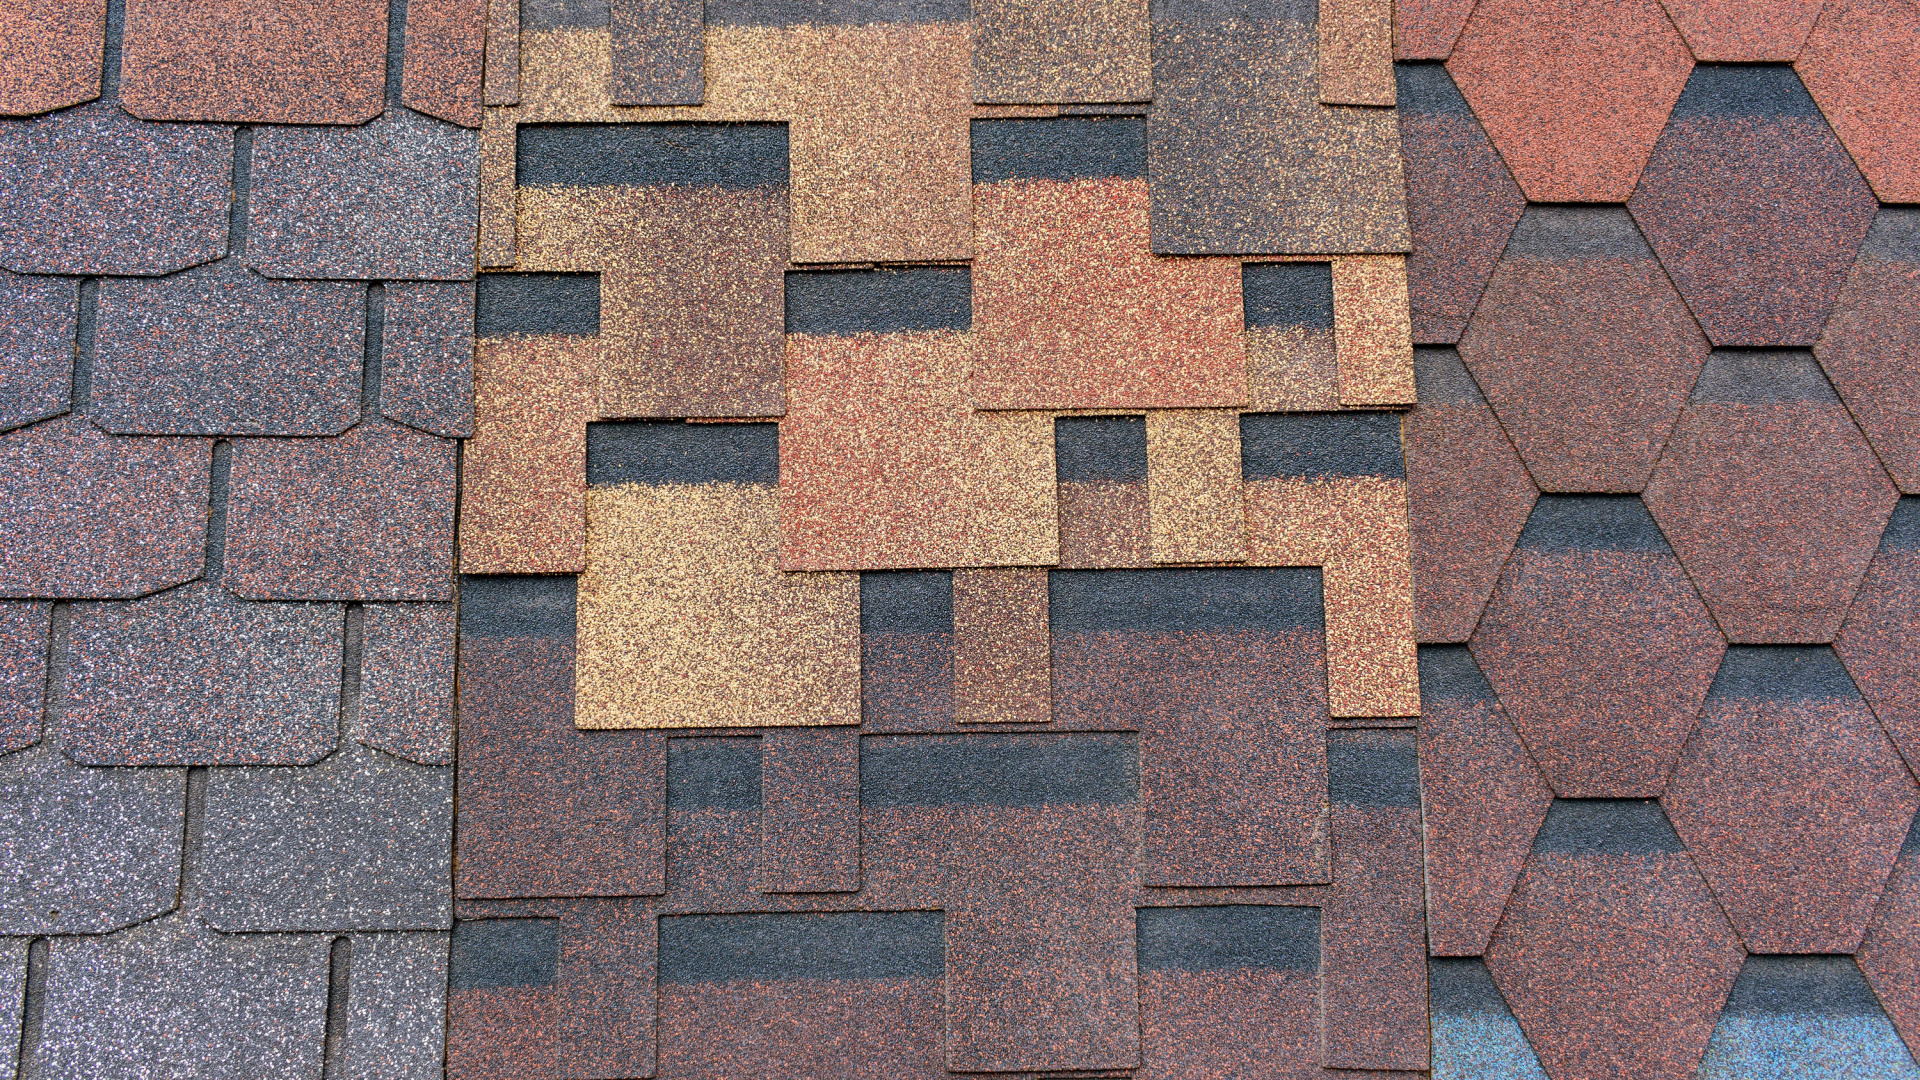 Other Roofing Materials to Consider